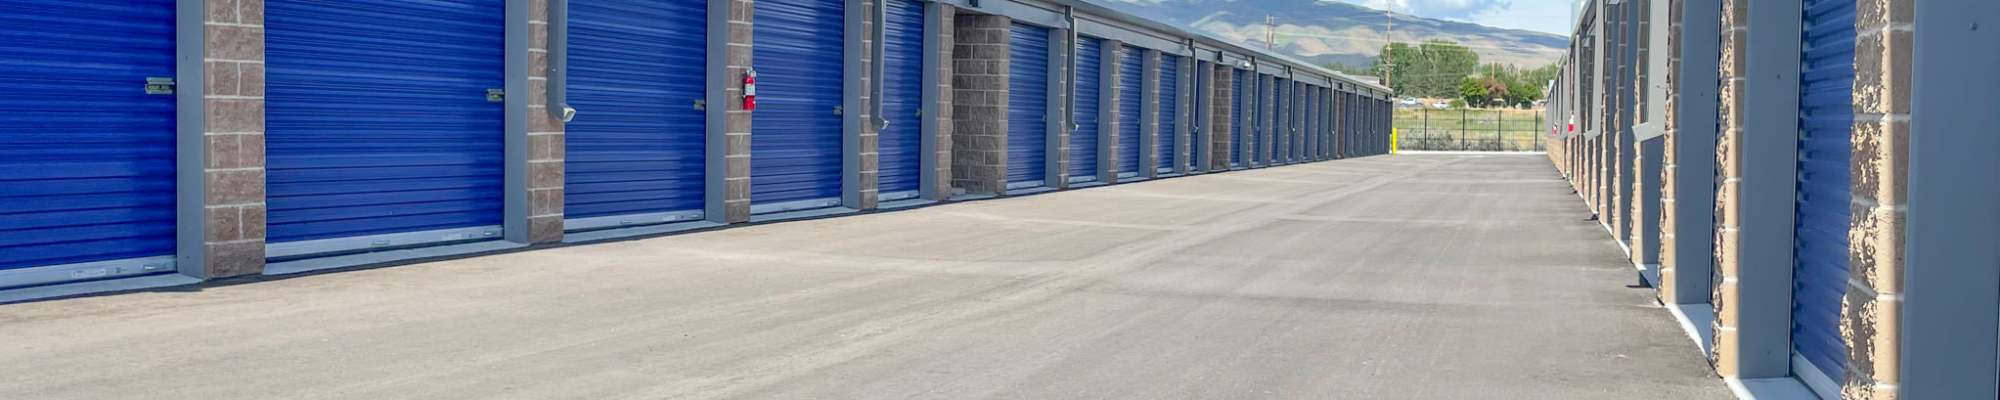 Unit sizes and prices at STOR-N-LOCK Self Storage in Boise, Idaho